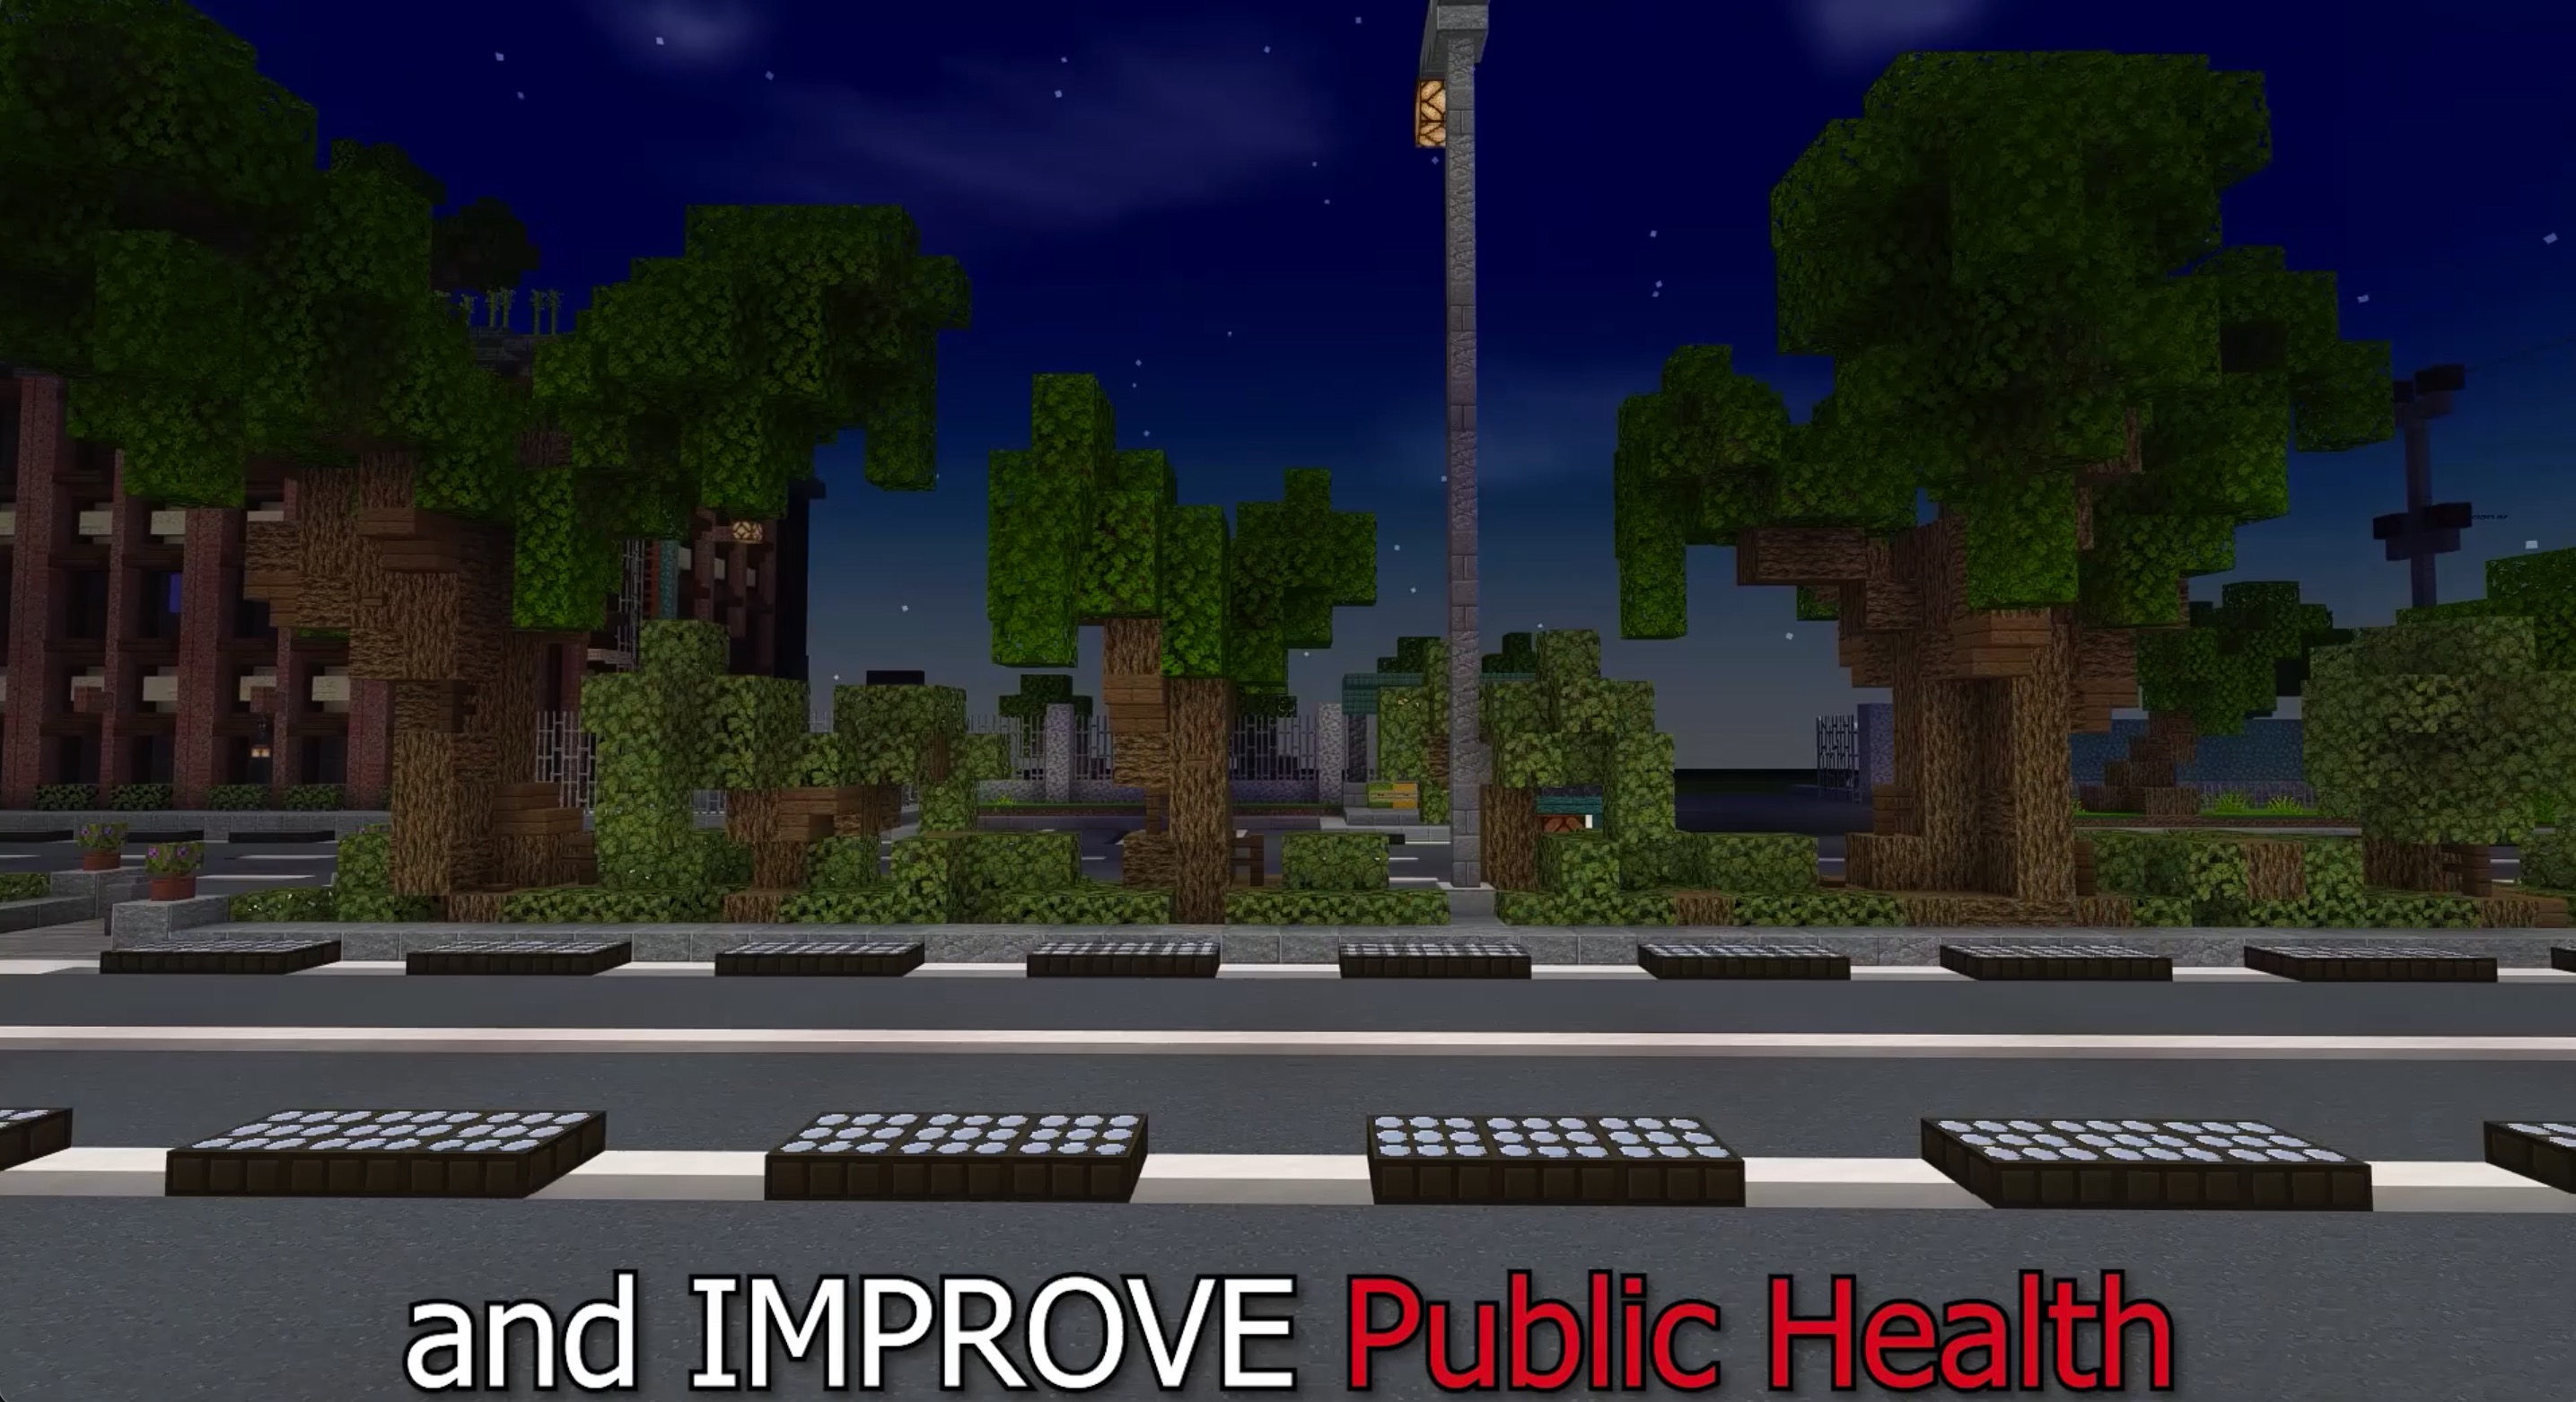 Solar lights and road studs make for a more sustainable and safer street at night. (Screenshot) 